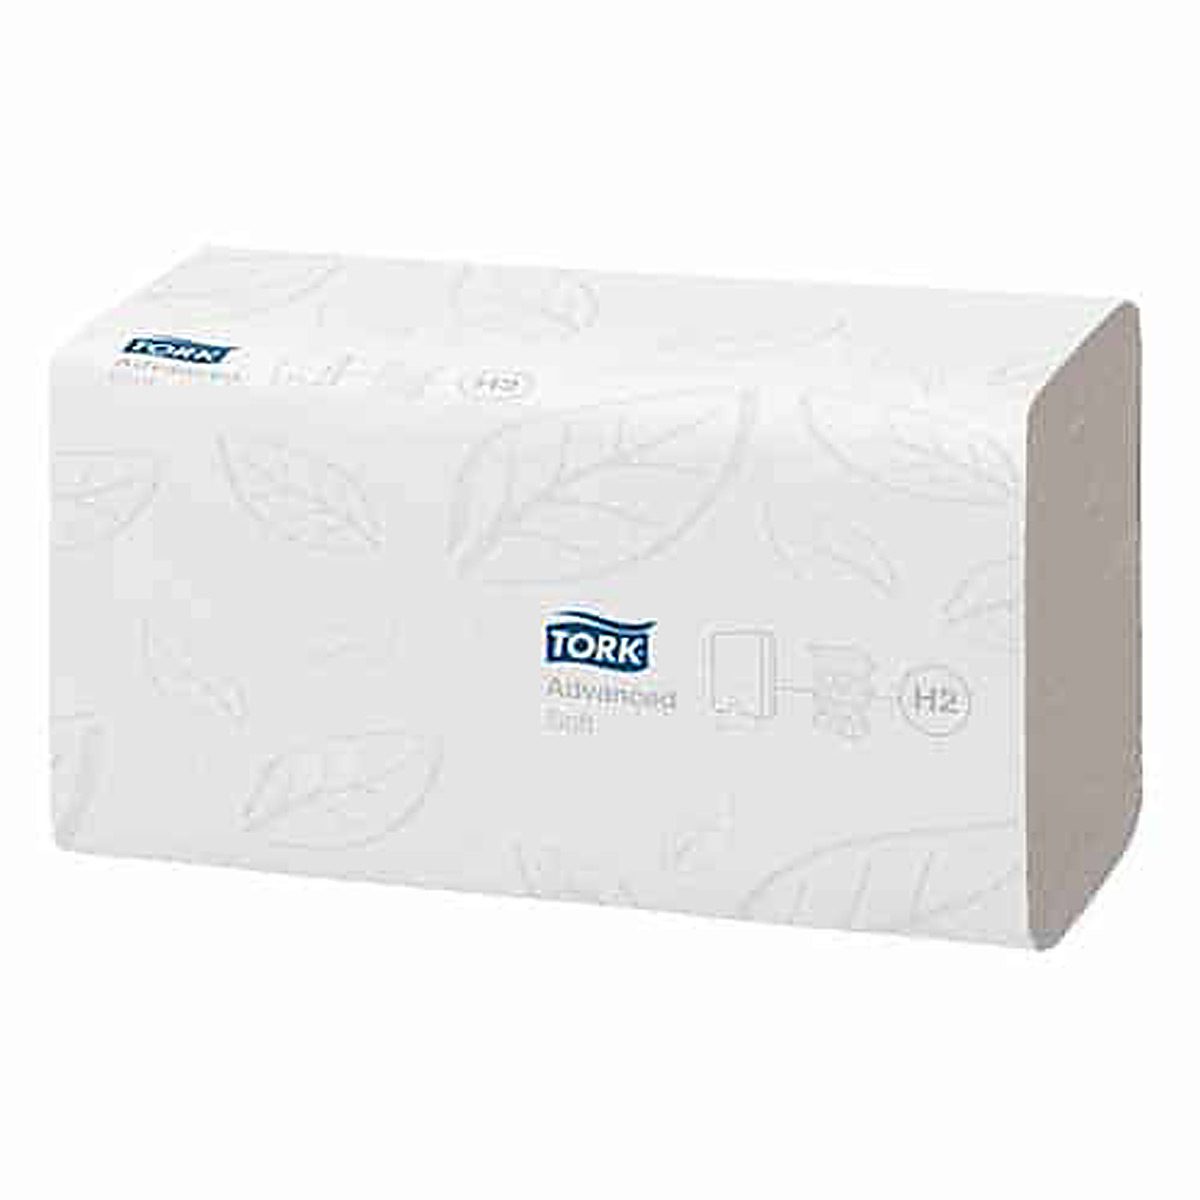 paper-products-paper-towels-tork-xpress-flushable-multifold-hand-towel-2-ply-200-sheets-21-packs-h2-reduces-consumption-and-waste-with- reliable-one-at-a-time-dispensing-vjs-distributors-129089